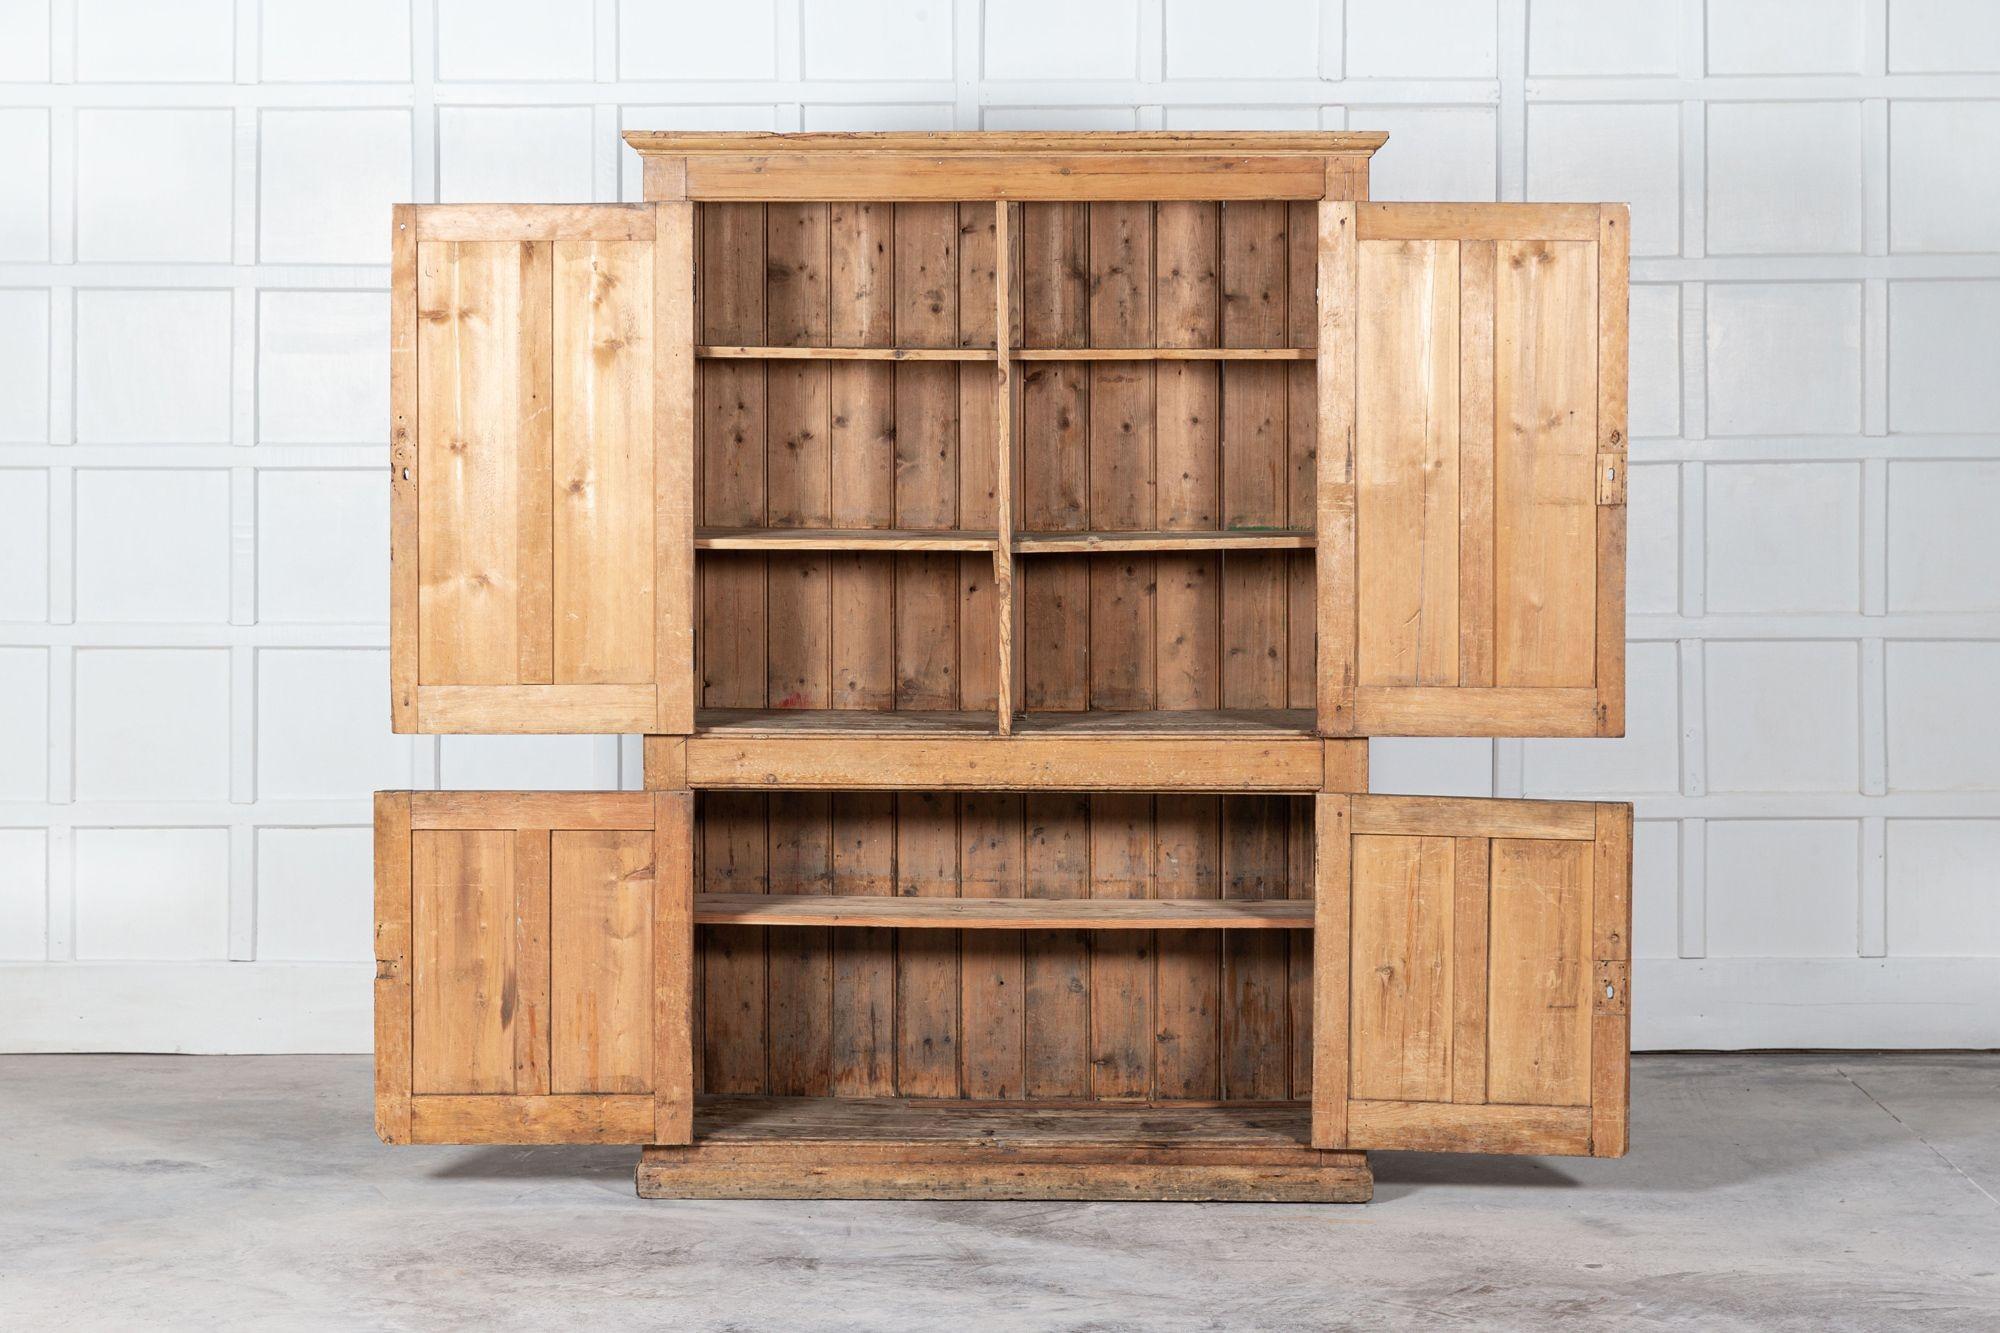 circa 1890
Large 19thC English pine Housekeepers cupboard
Measures: W 143 x D 49 x H 199cm.
   